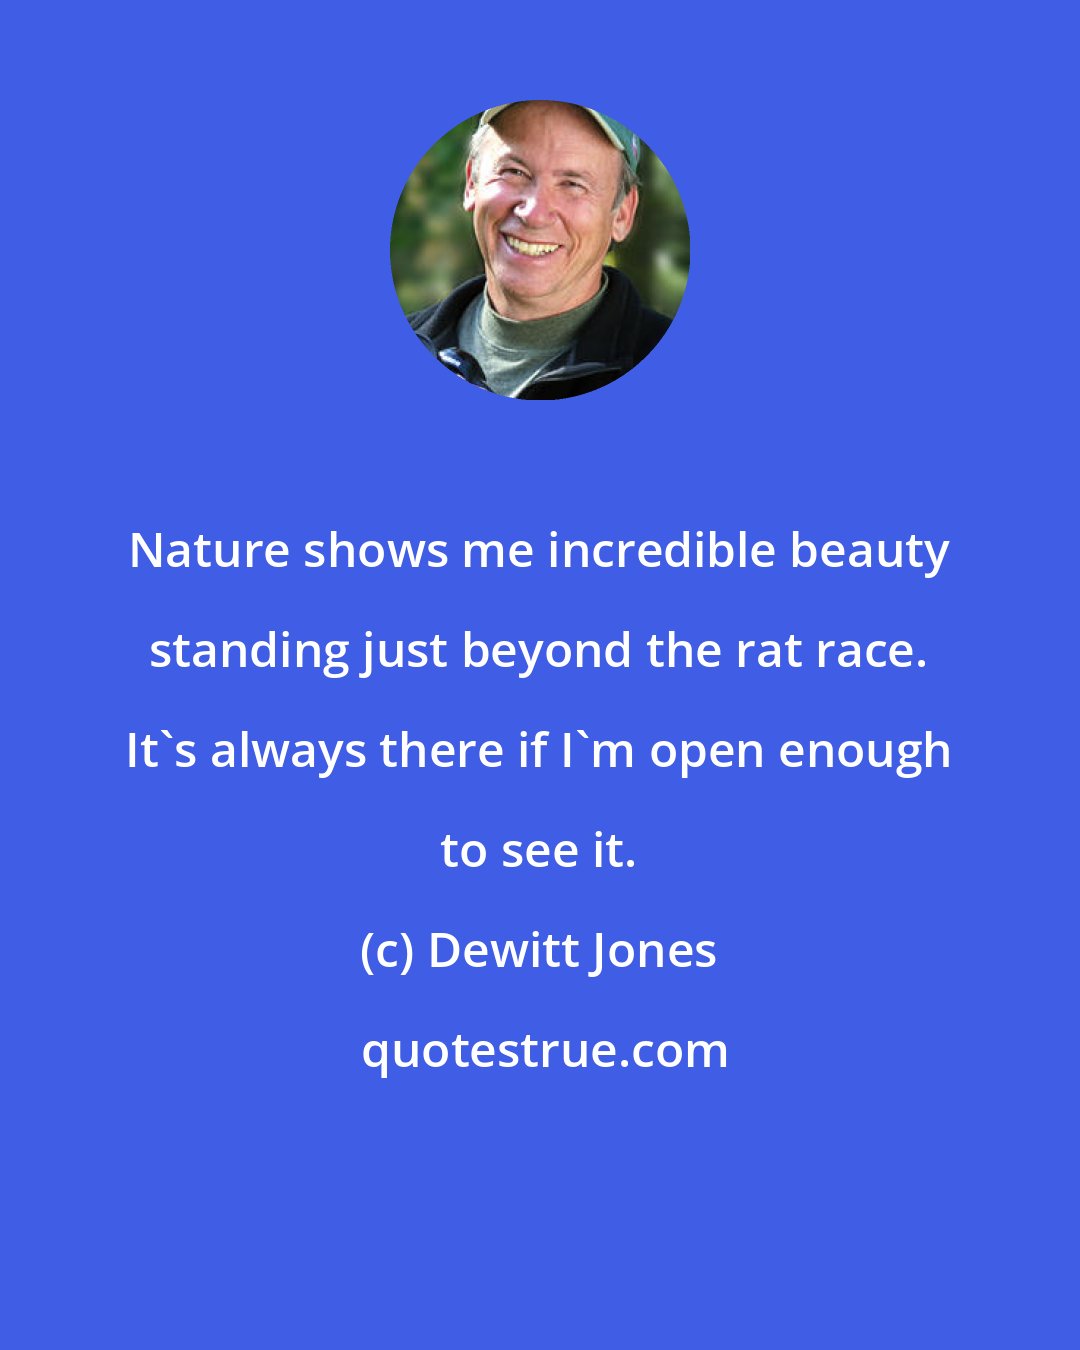 Dewitt Jones: Nature shows me incredible beauty standing just beyond the rat race. It's always there if I'm open enough to see it.